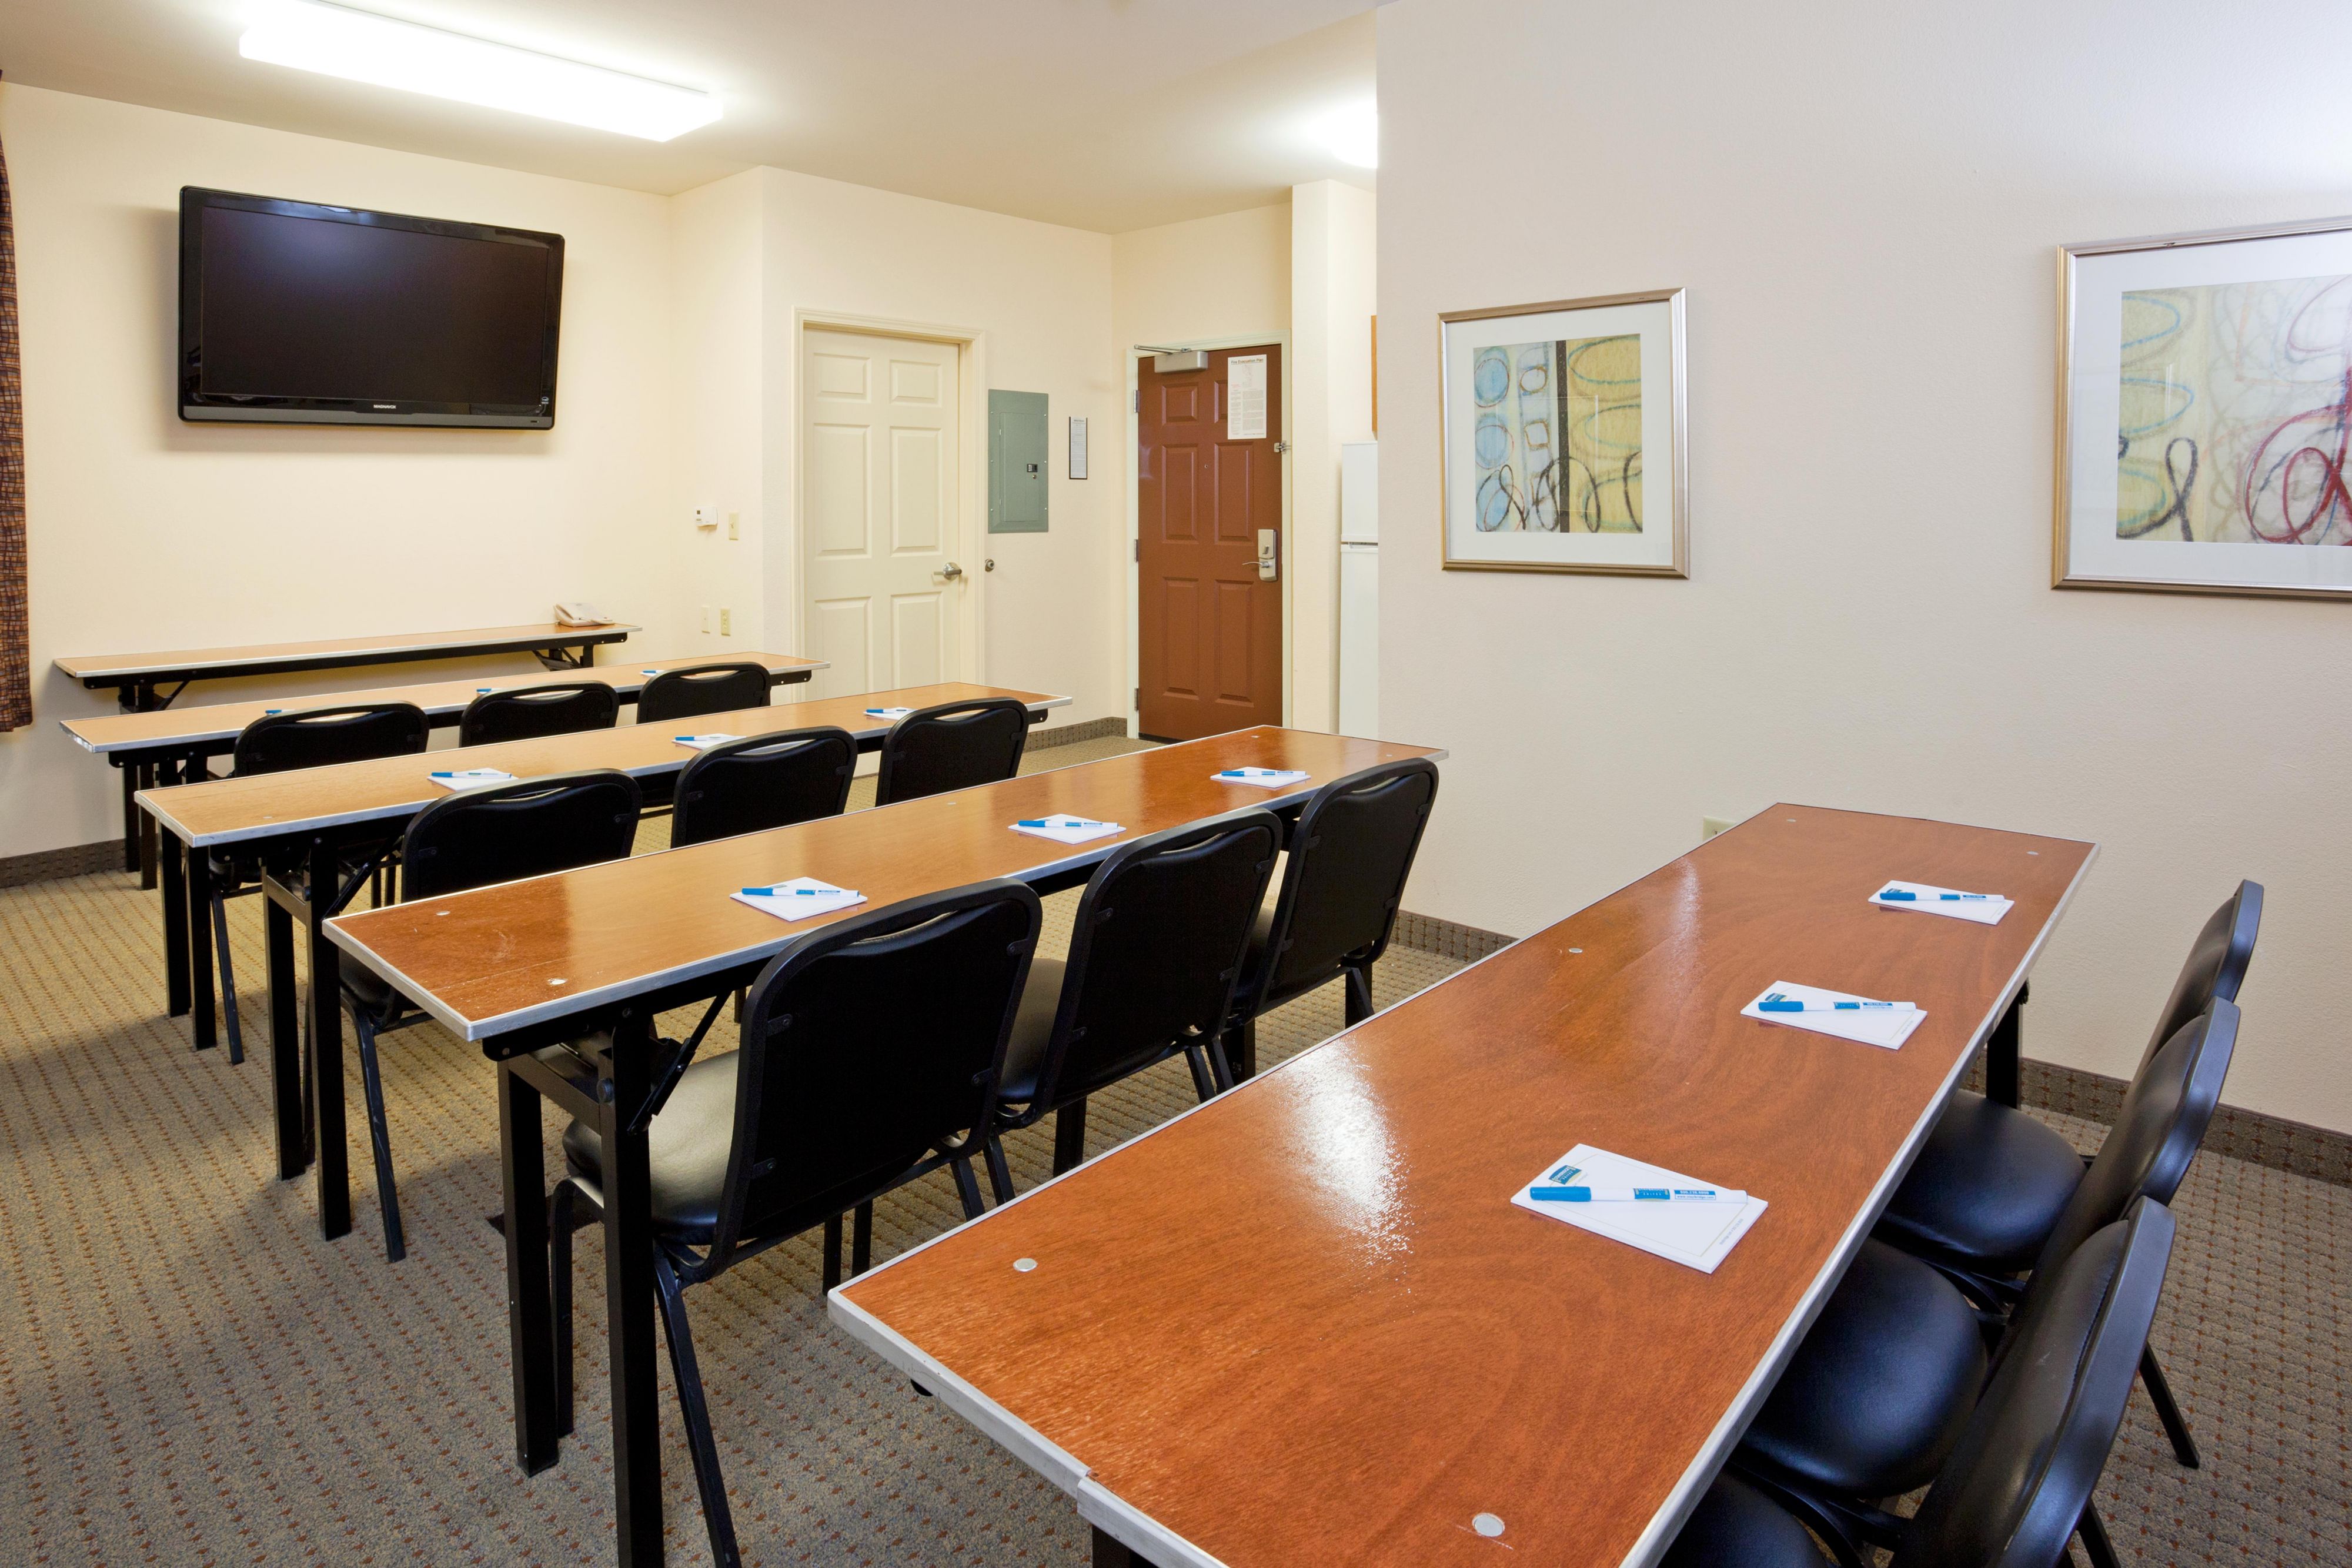 We offer an on-site meeting room perfect for a family or team gathering, meetings or other smaller get togethers. Make sure to contact our Director of Sales if you’re needing a block of rooms for your group. 